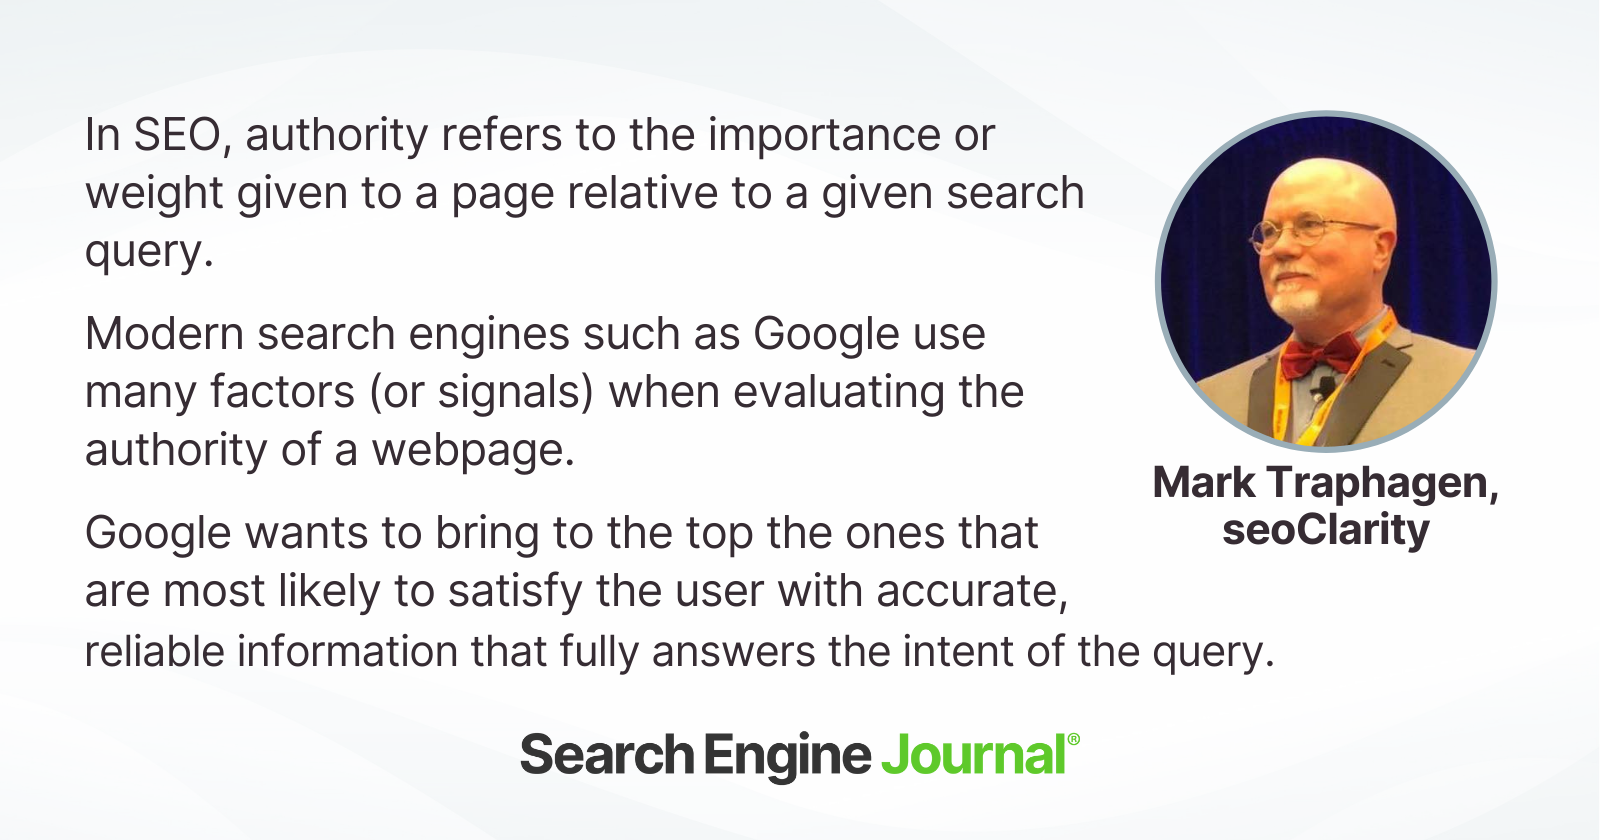 Mark Traphagen on how search engines gauge authority.